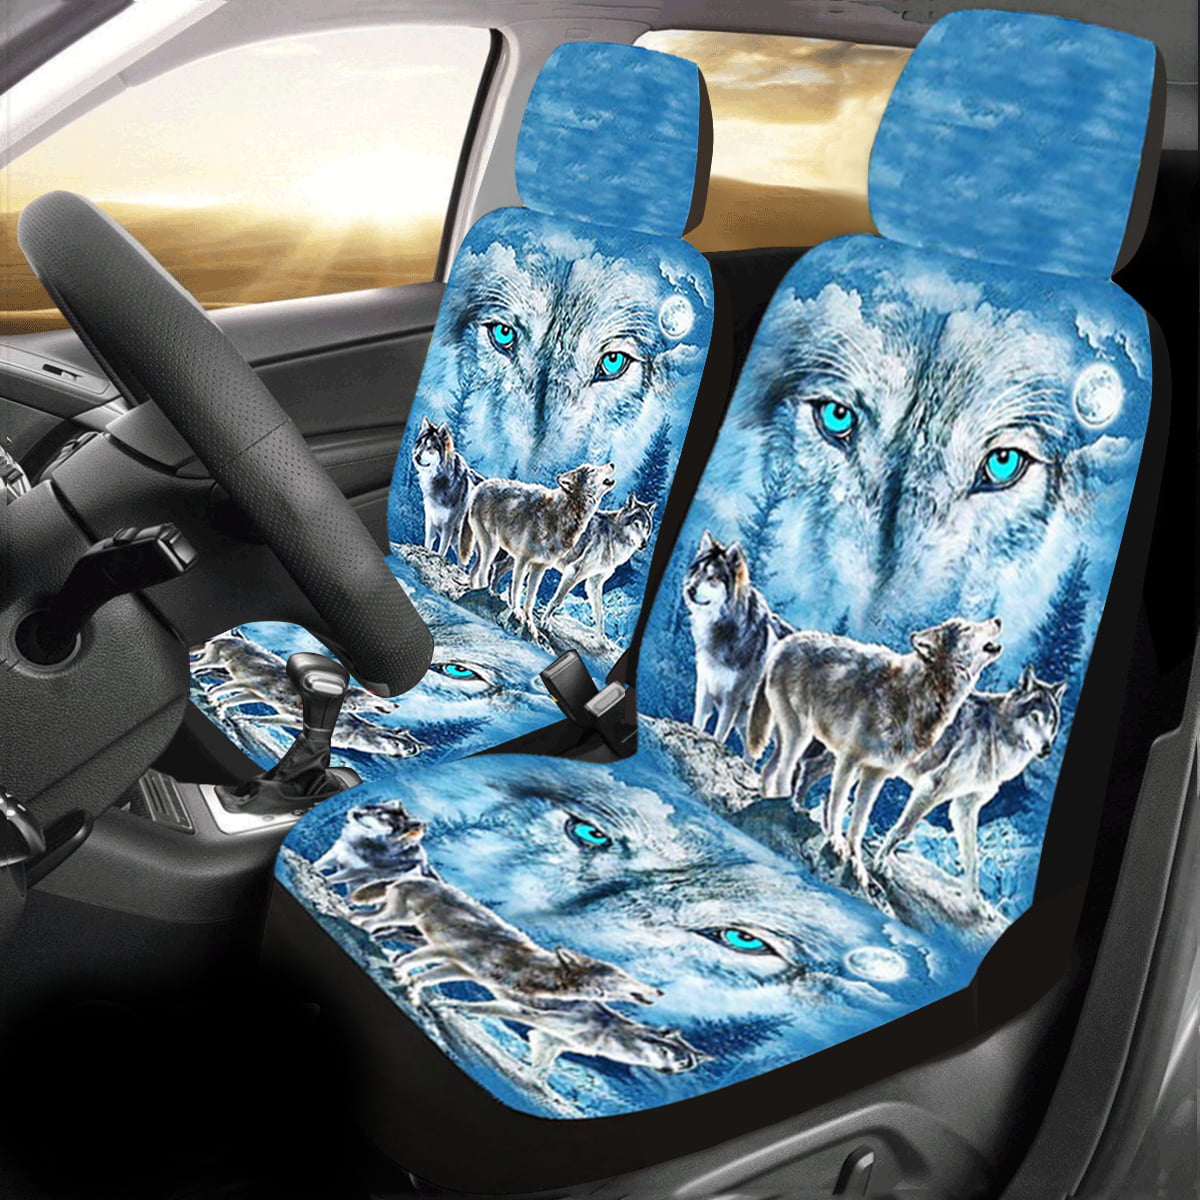 KUIFORTI 2 Pieces Black Wolf Car Seat Covers for Womens Mens,Animal Vehicle Seat Protector,Auto Front Seats Cushion,Fit Sedan SUV Van Truck 